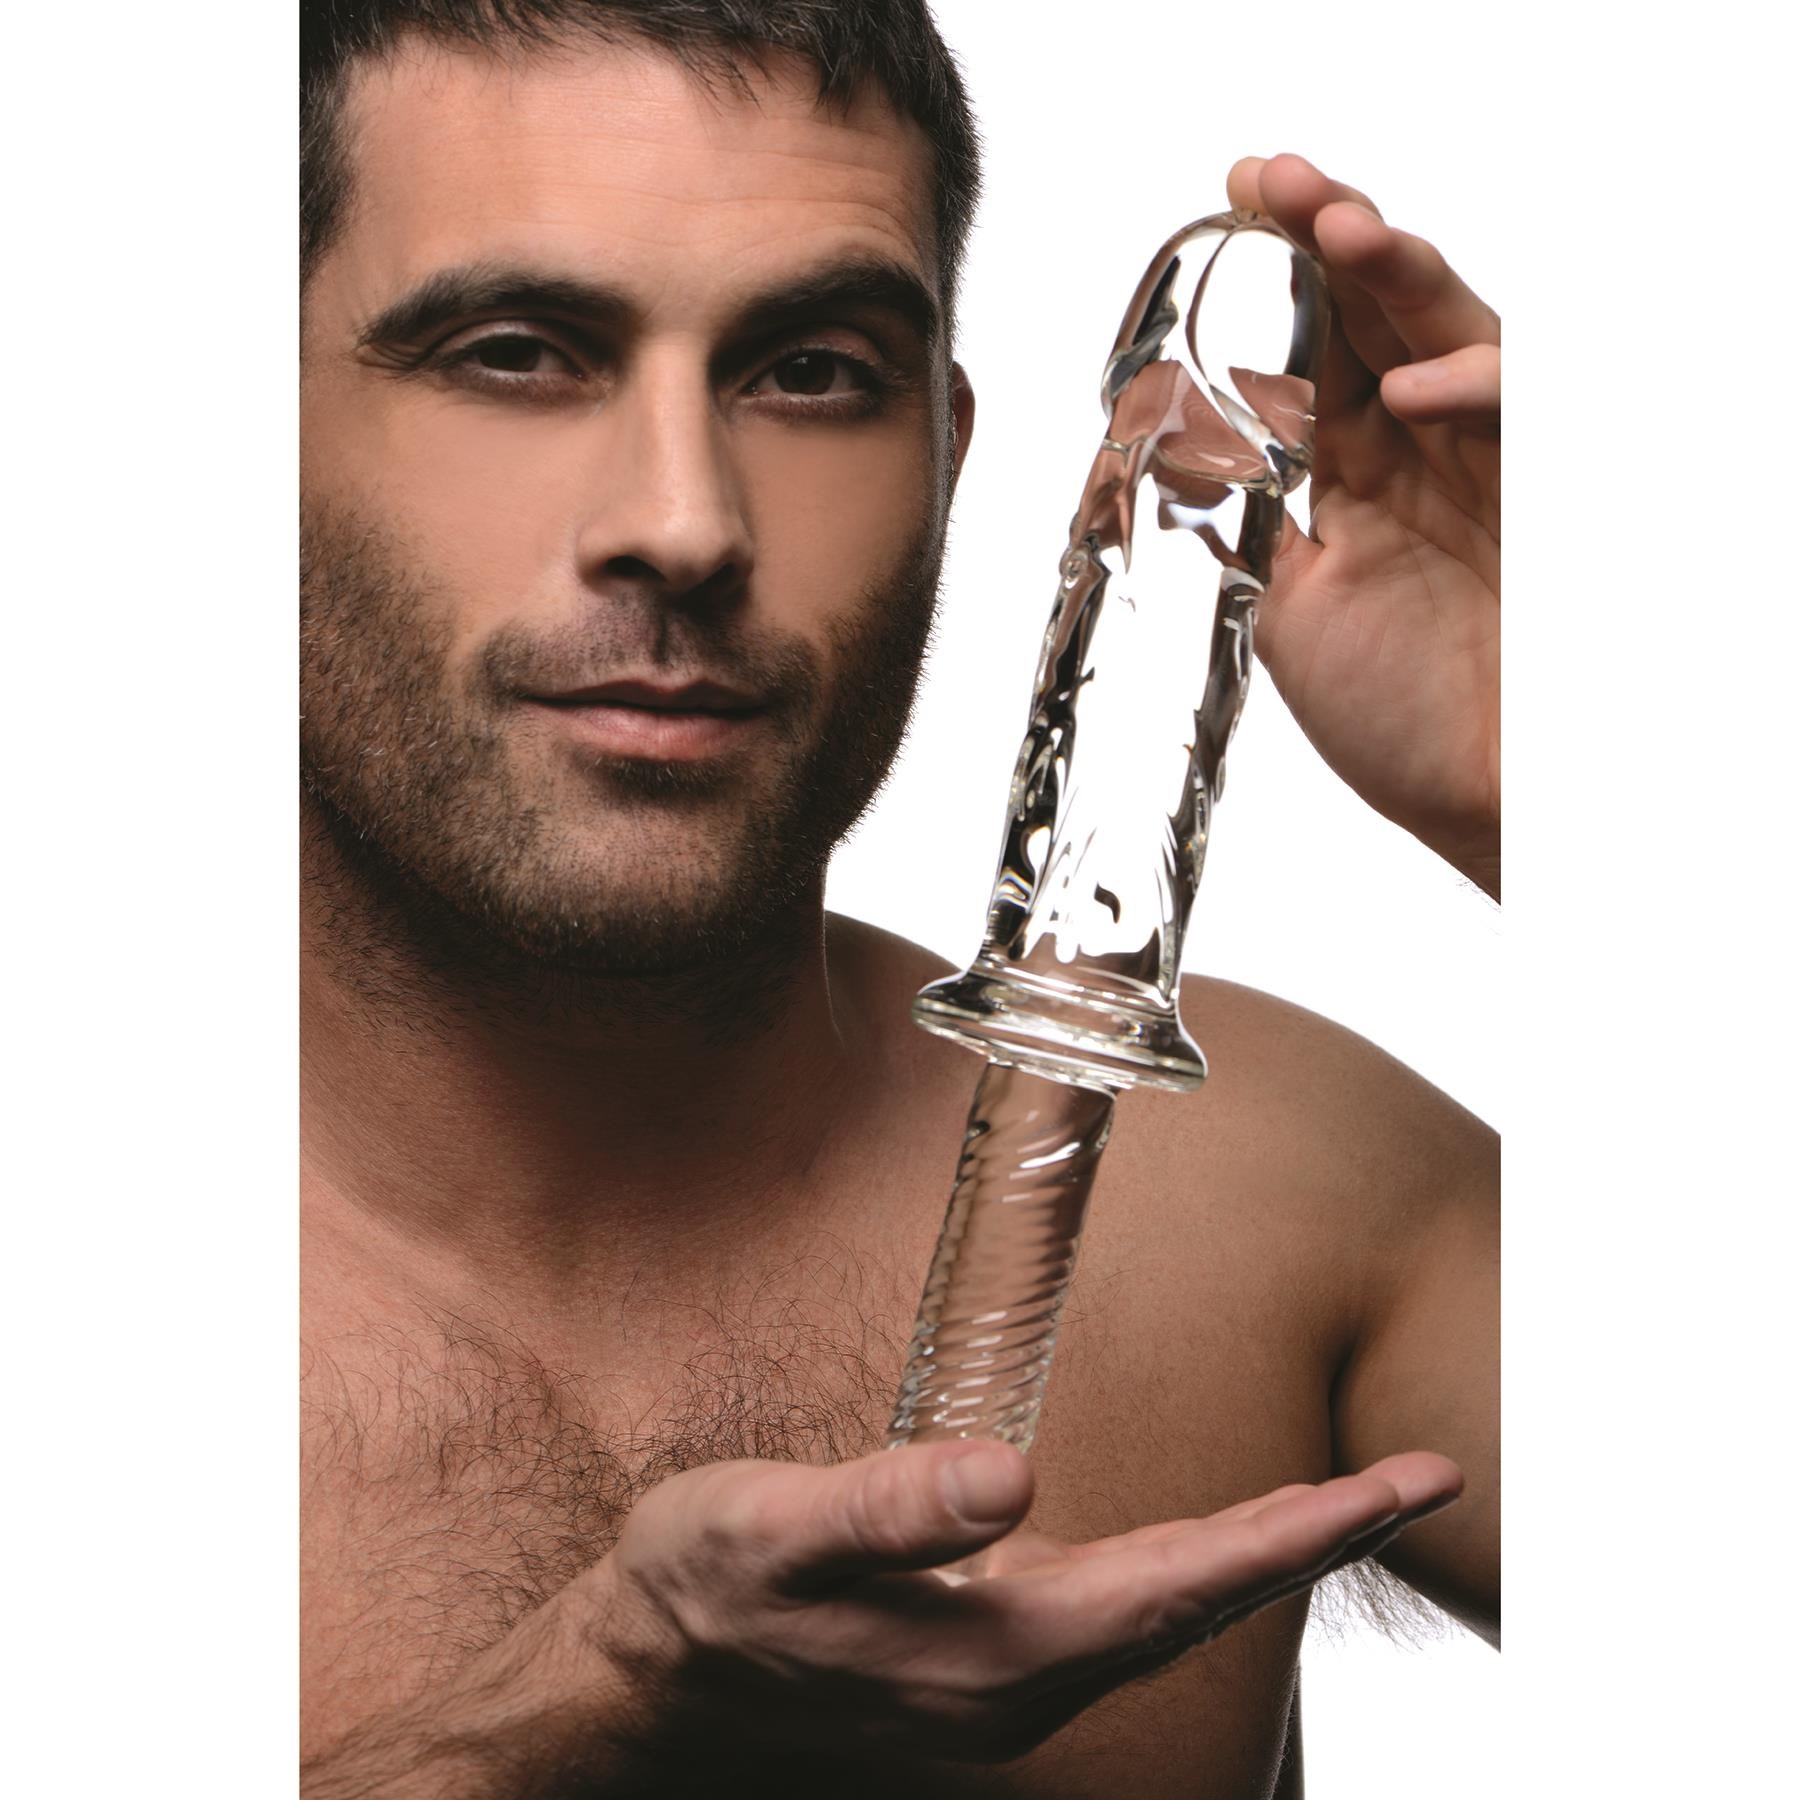 Brutus Glass Thruster Dildo Hand Shot with Male Model